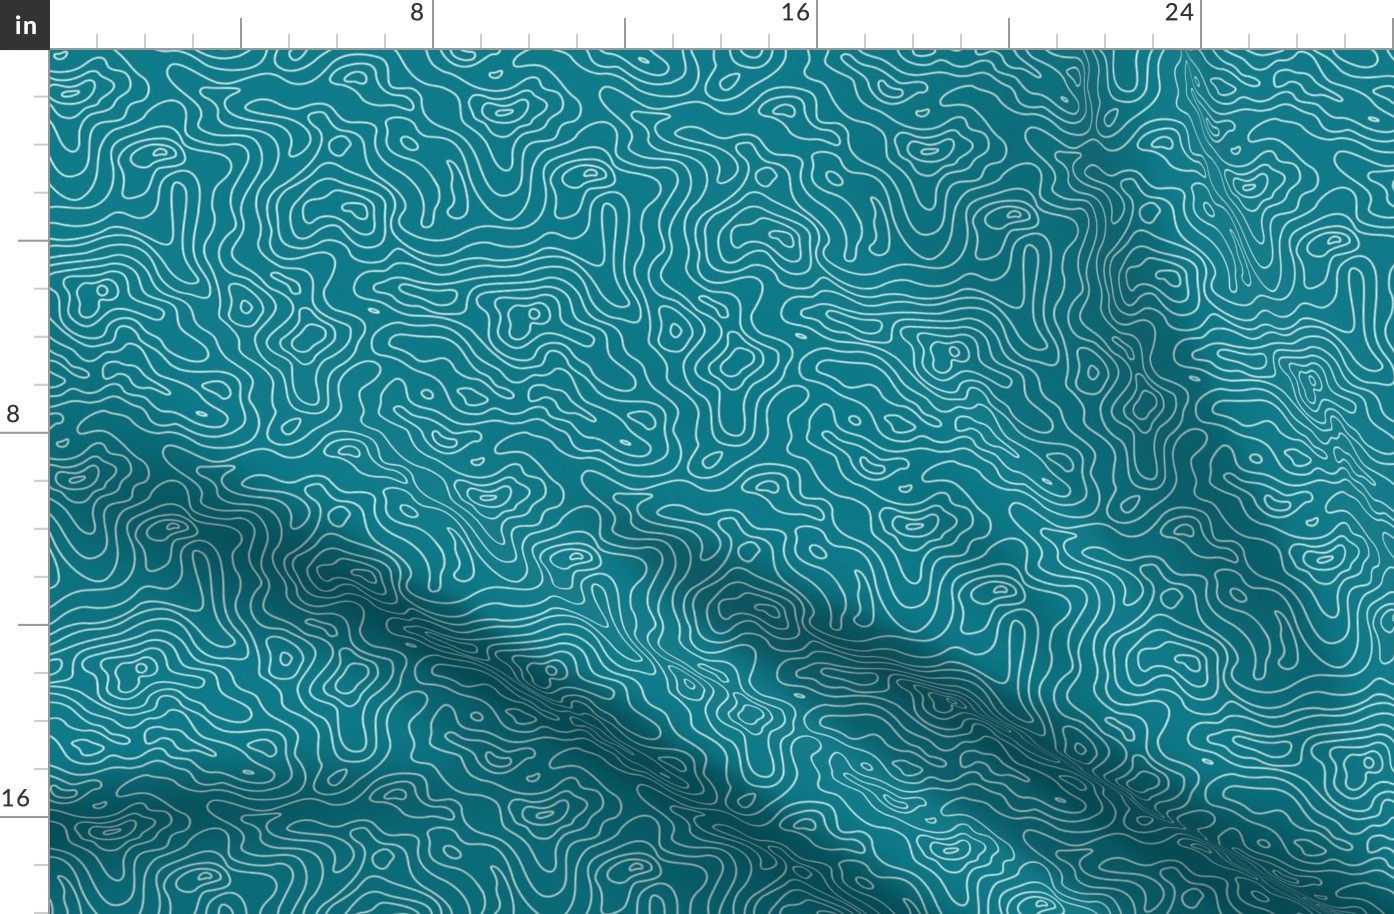 Mapping Contours, Ocean Depth Map, Map Teal and White